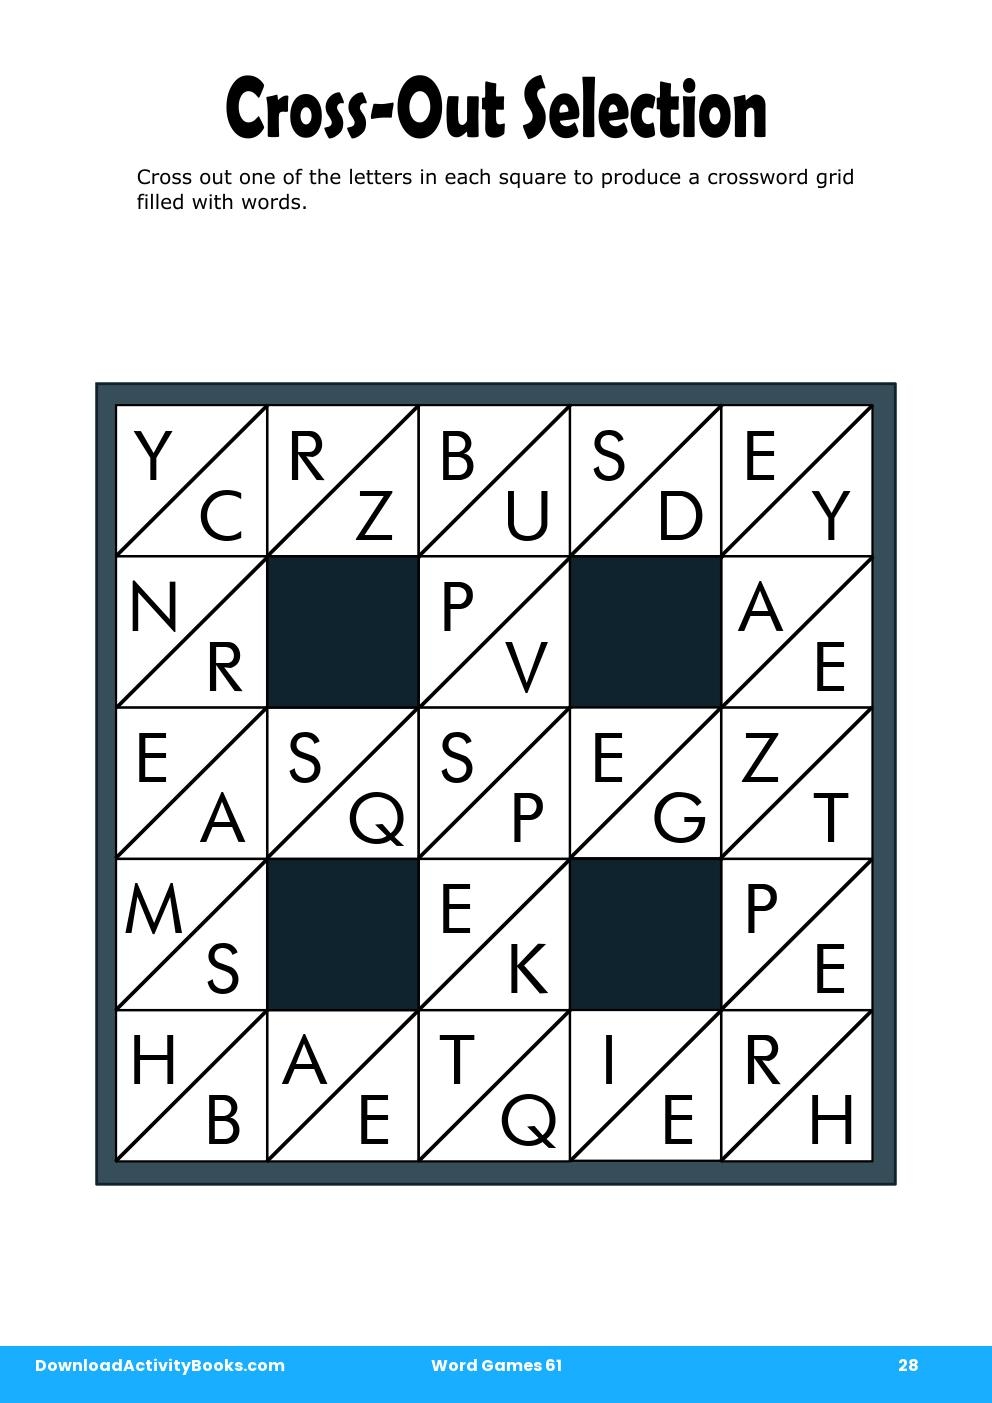 Cross-Out Selection in Word Games 61